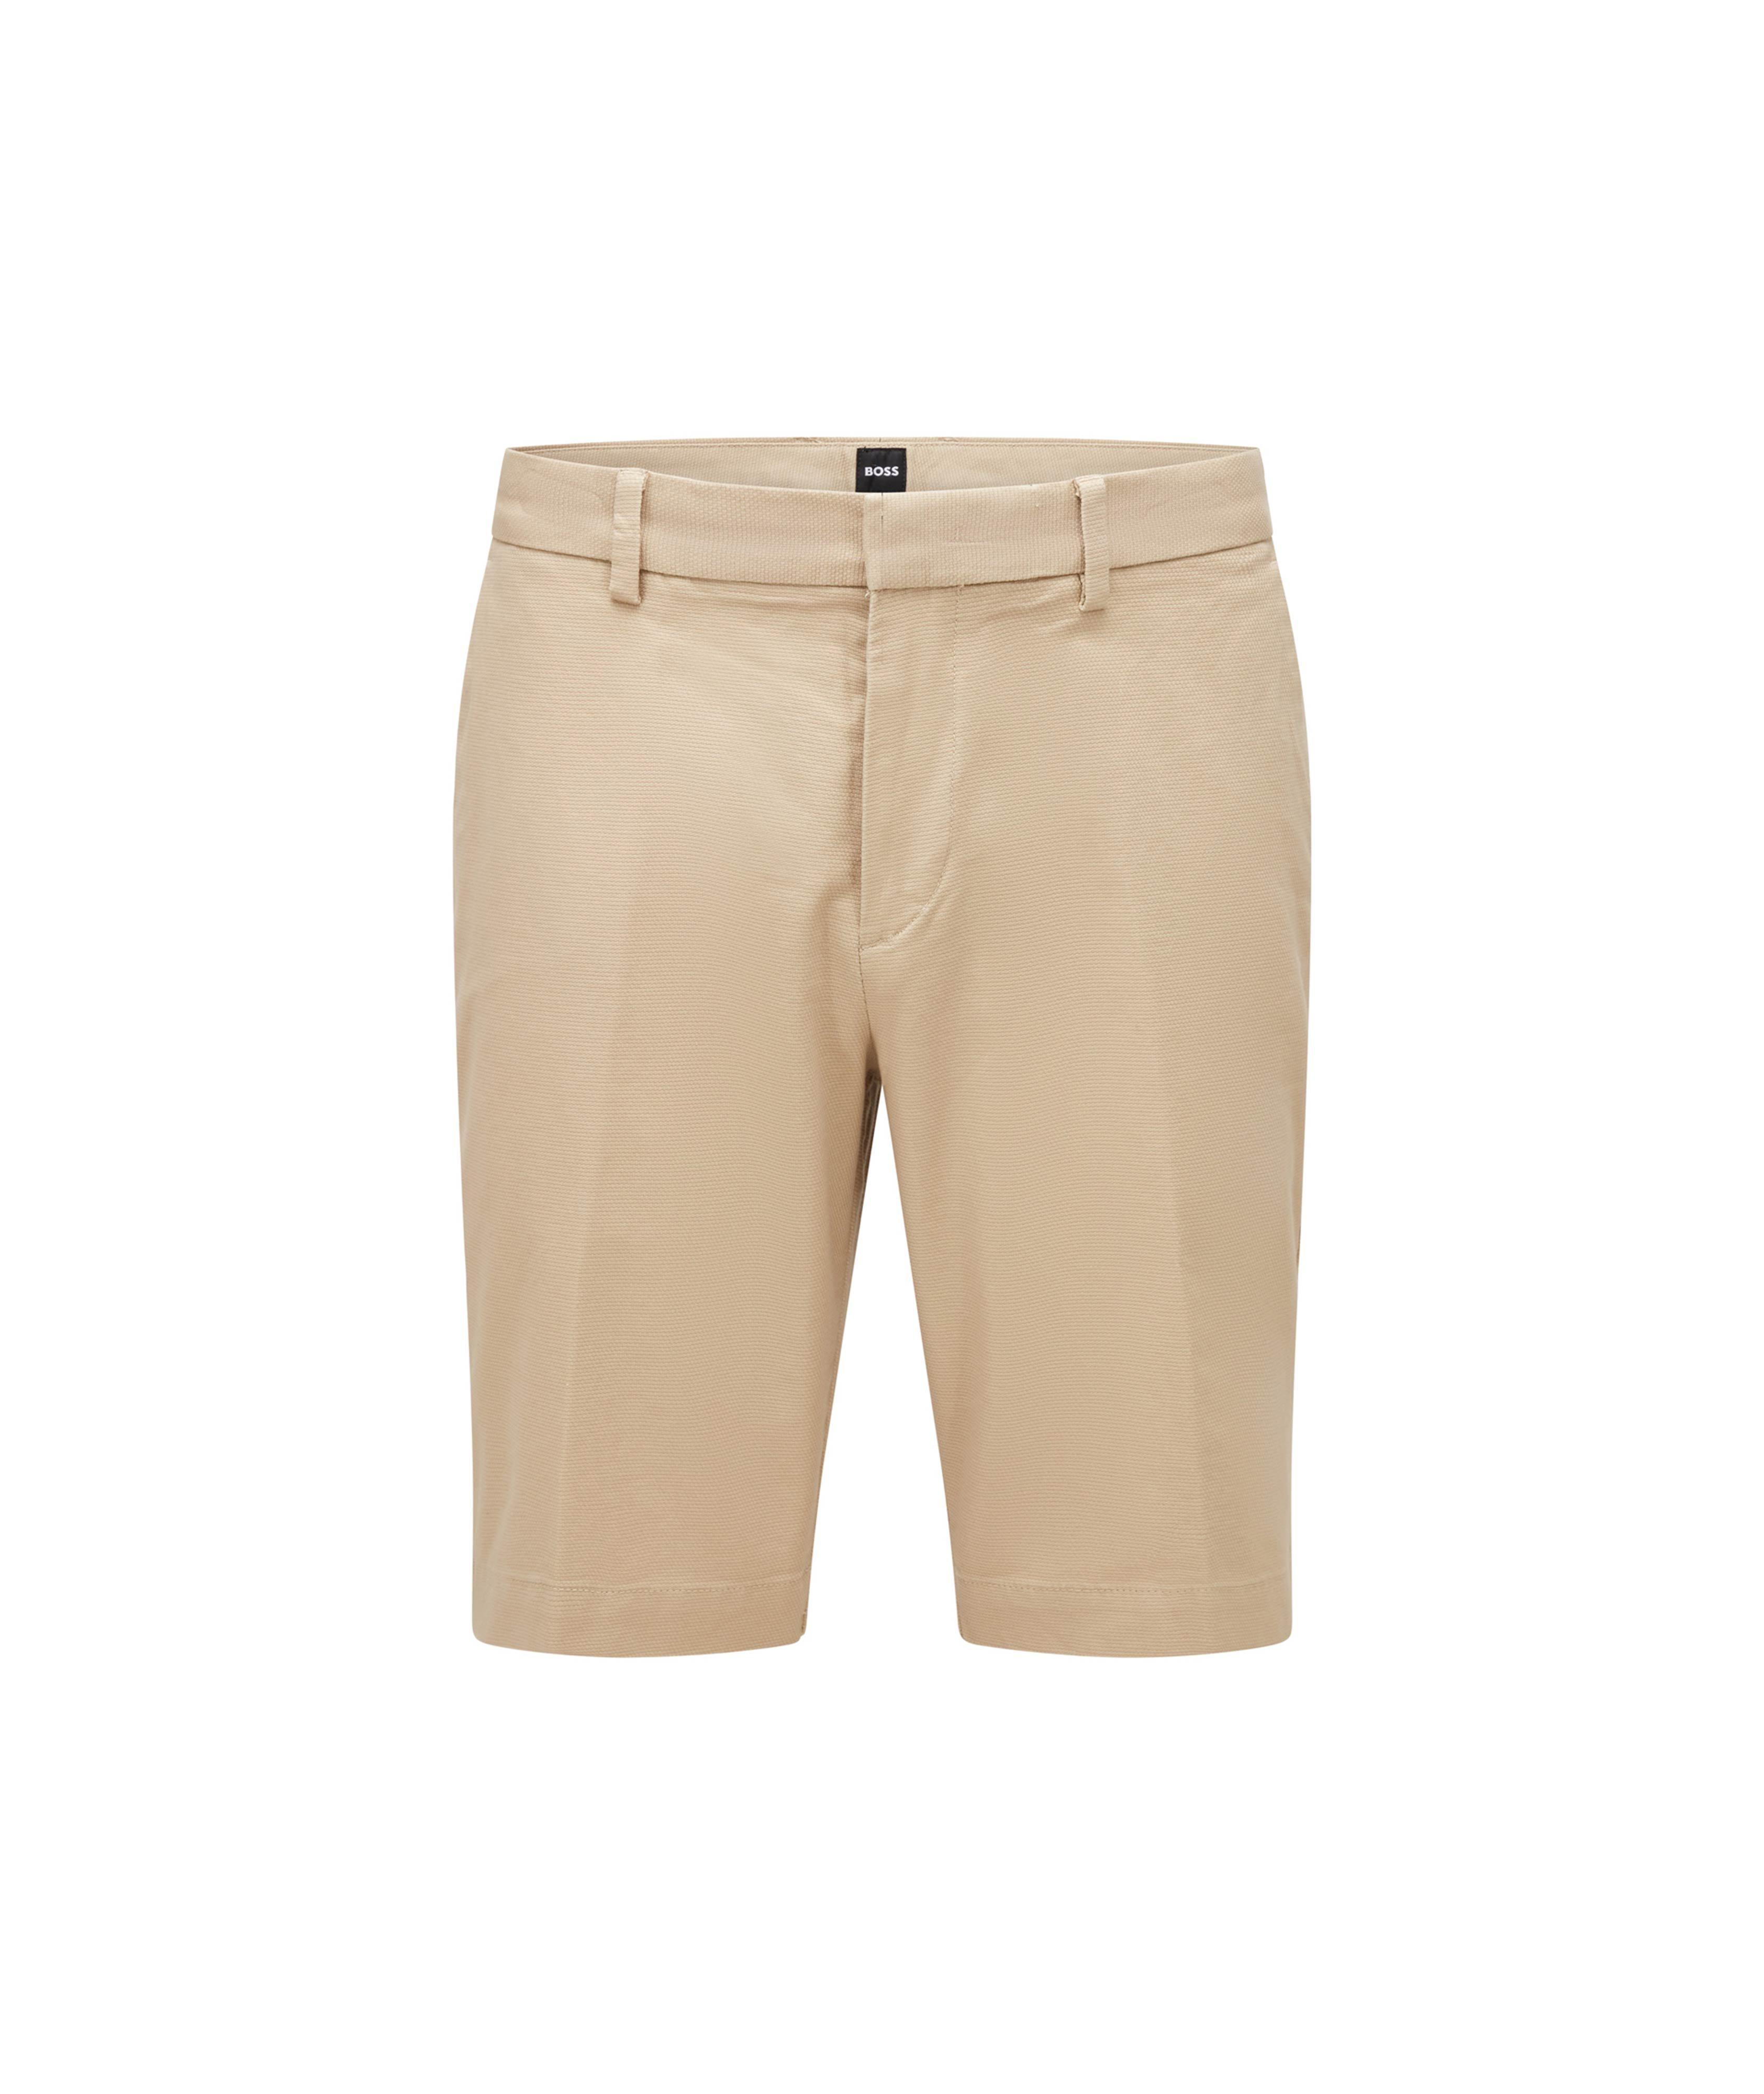 Slim Fit Stretchy Cotton Shorts  image 0